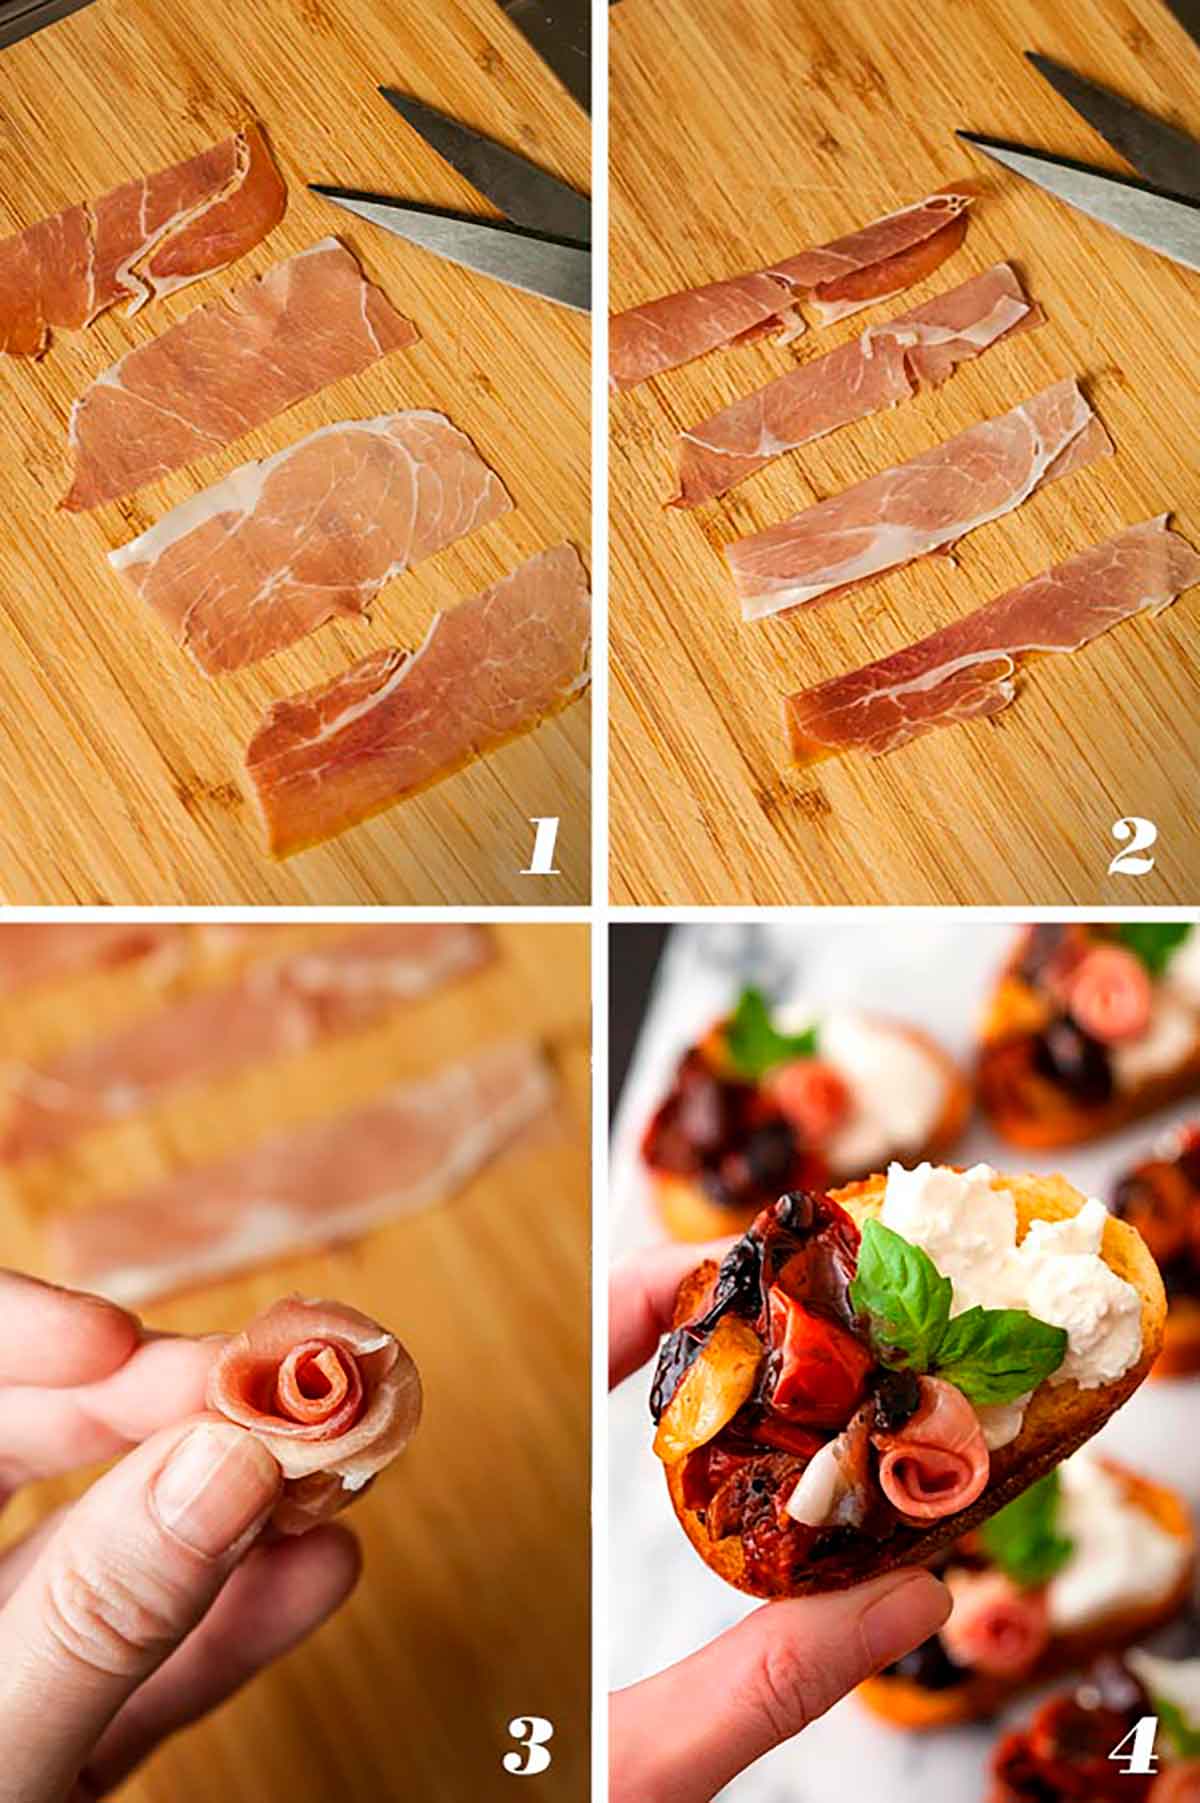 A collage of 4 numbered images showing how to make a prosciutto rose.